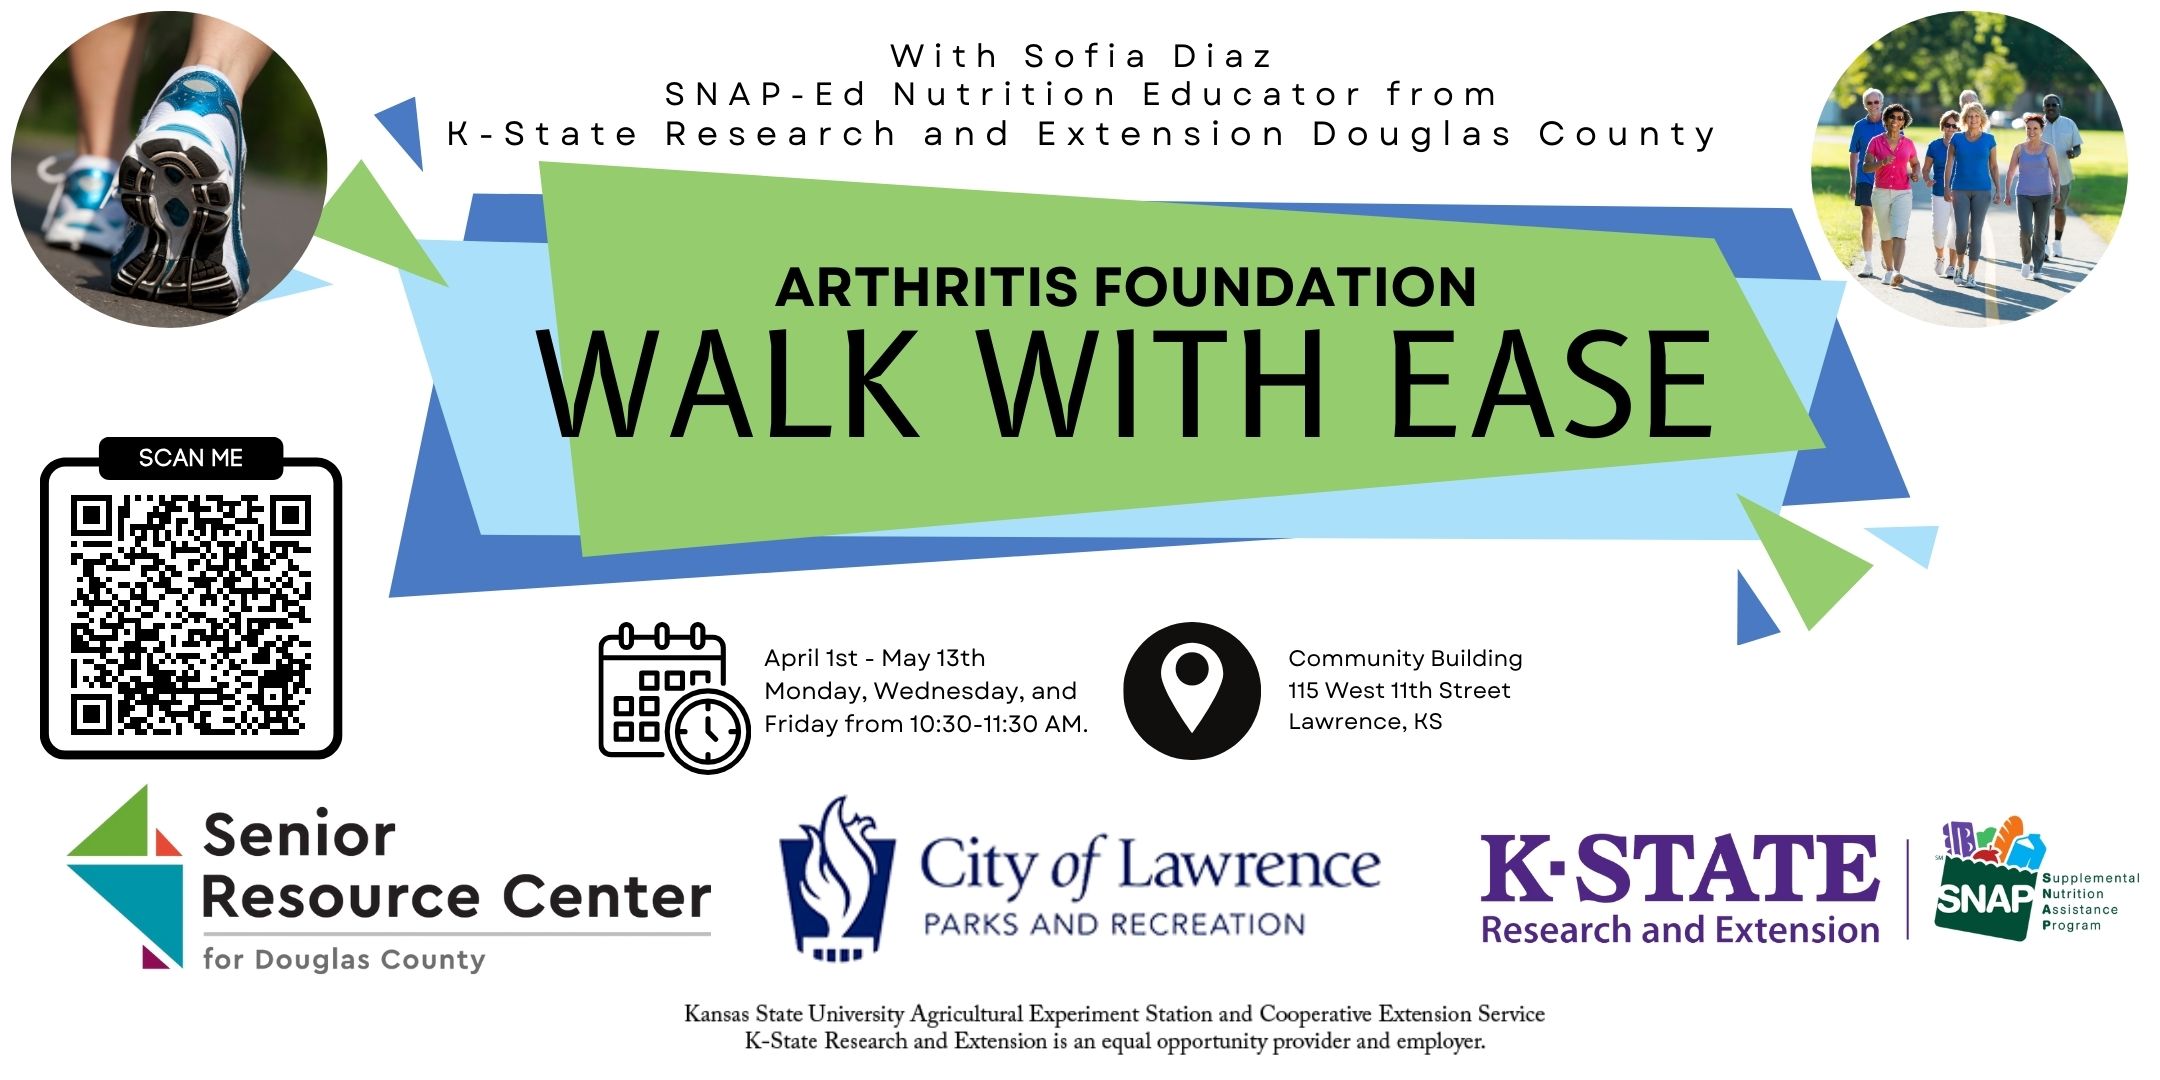 Join us for 3 days a week for This FREE 6 - Week program that includes a guidebook with solutions for problems with being physically active. Walk with ease Arthritis Foundation bit.ly/42M2gQv April 1st - May 13th  Monday, Wednesday, and Friday from 10:30-11:30 AM. Community Building  115 West 11th Street Lawrence, KS Reduce the pain and discomfort of arthritis Increase balance, strength and walking pace Build confidence in your ability to be physically active Improve overall health